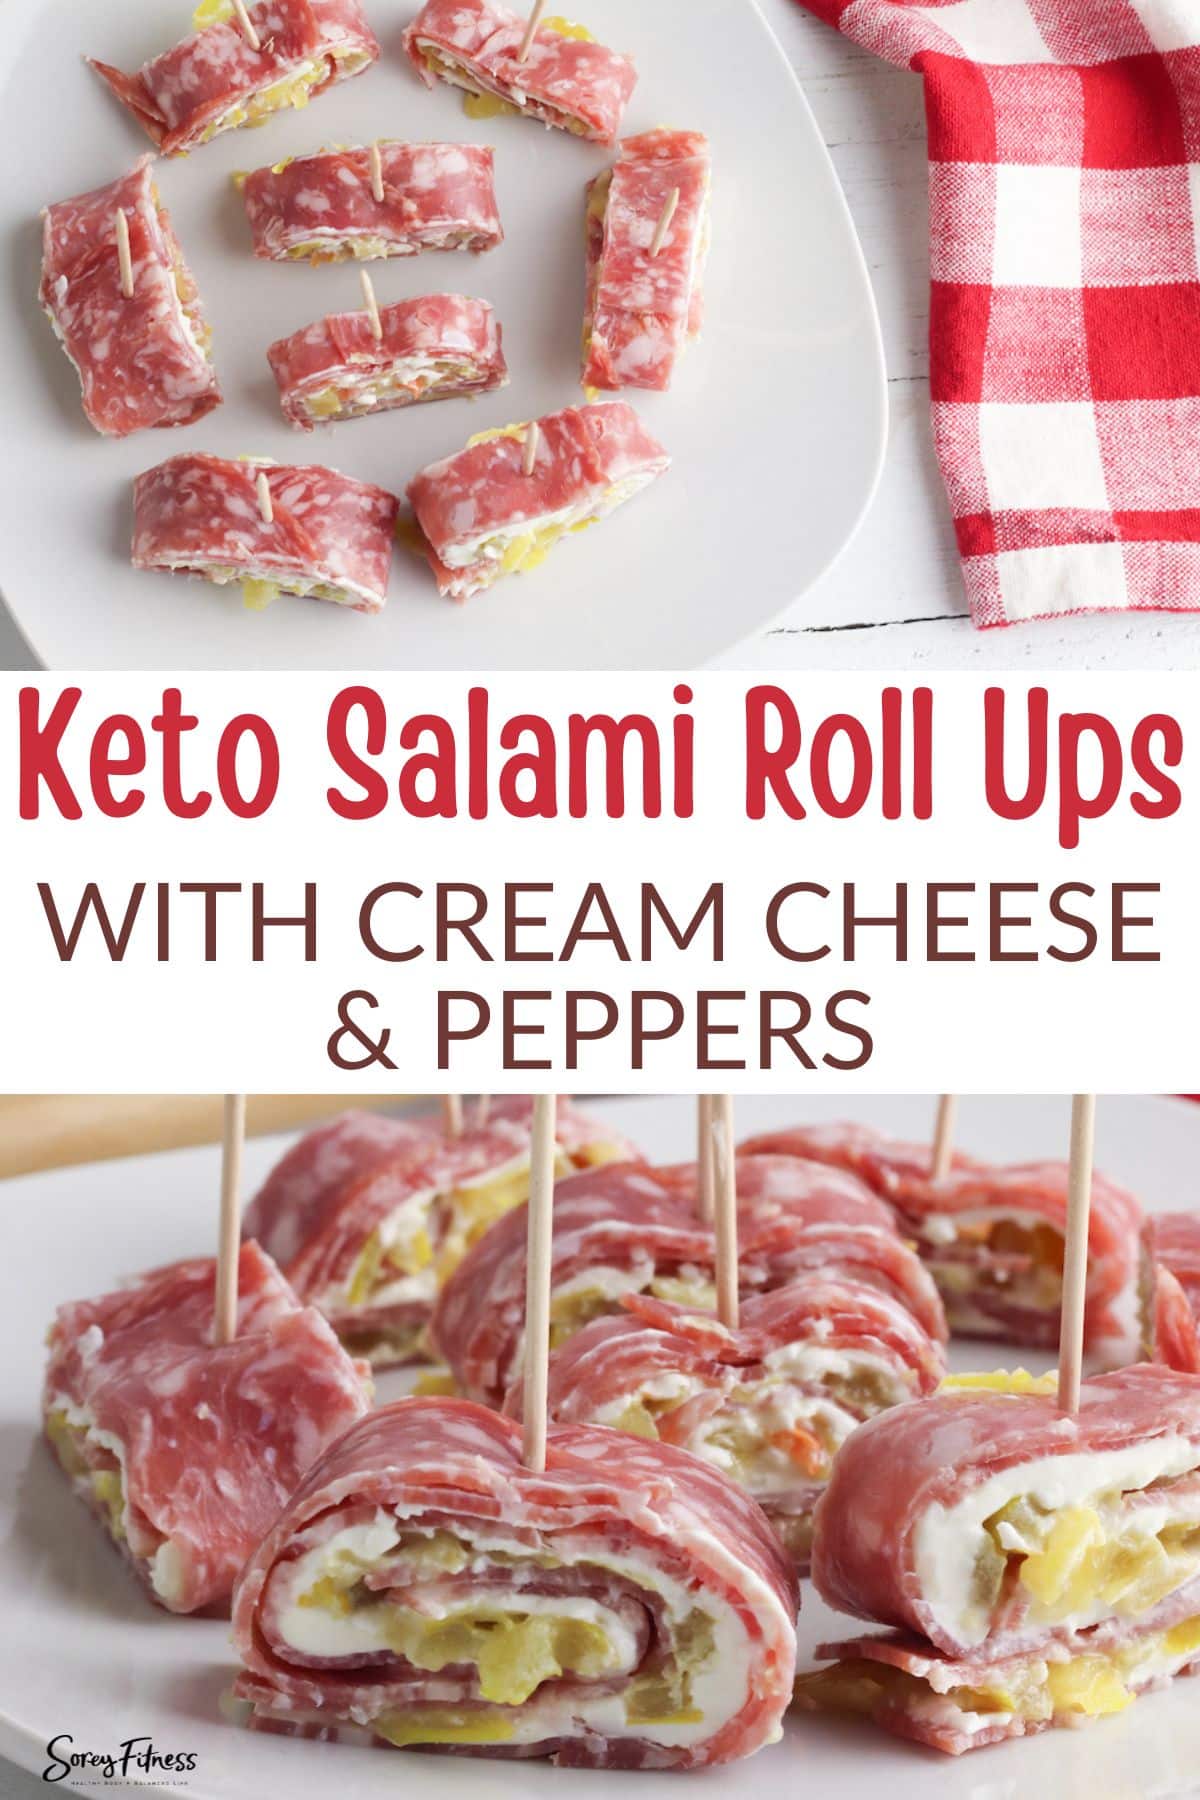 keto salami rolls ups with cream cheese and peppers - collage of 2 photos of the recipe, text overlay in the middle